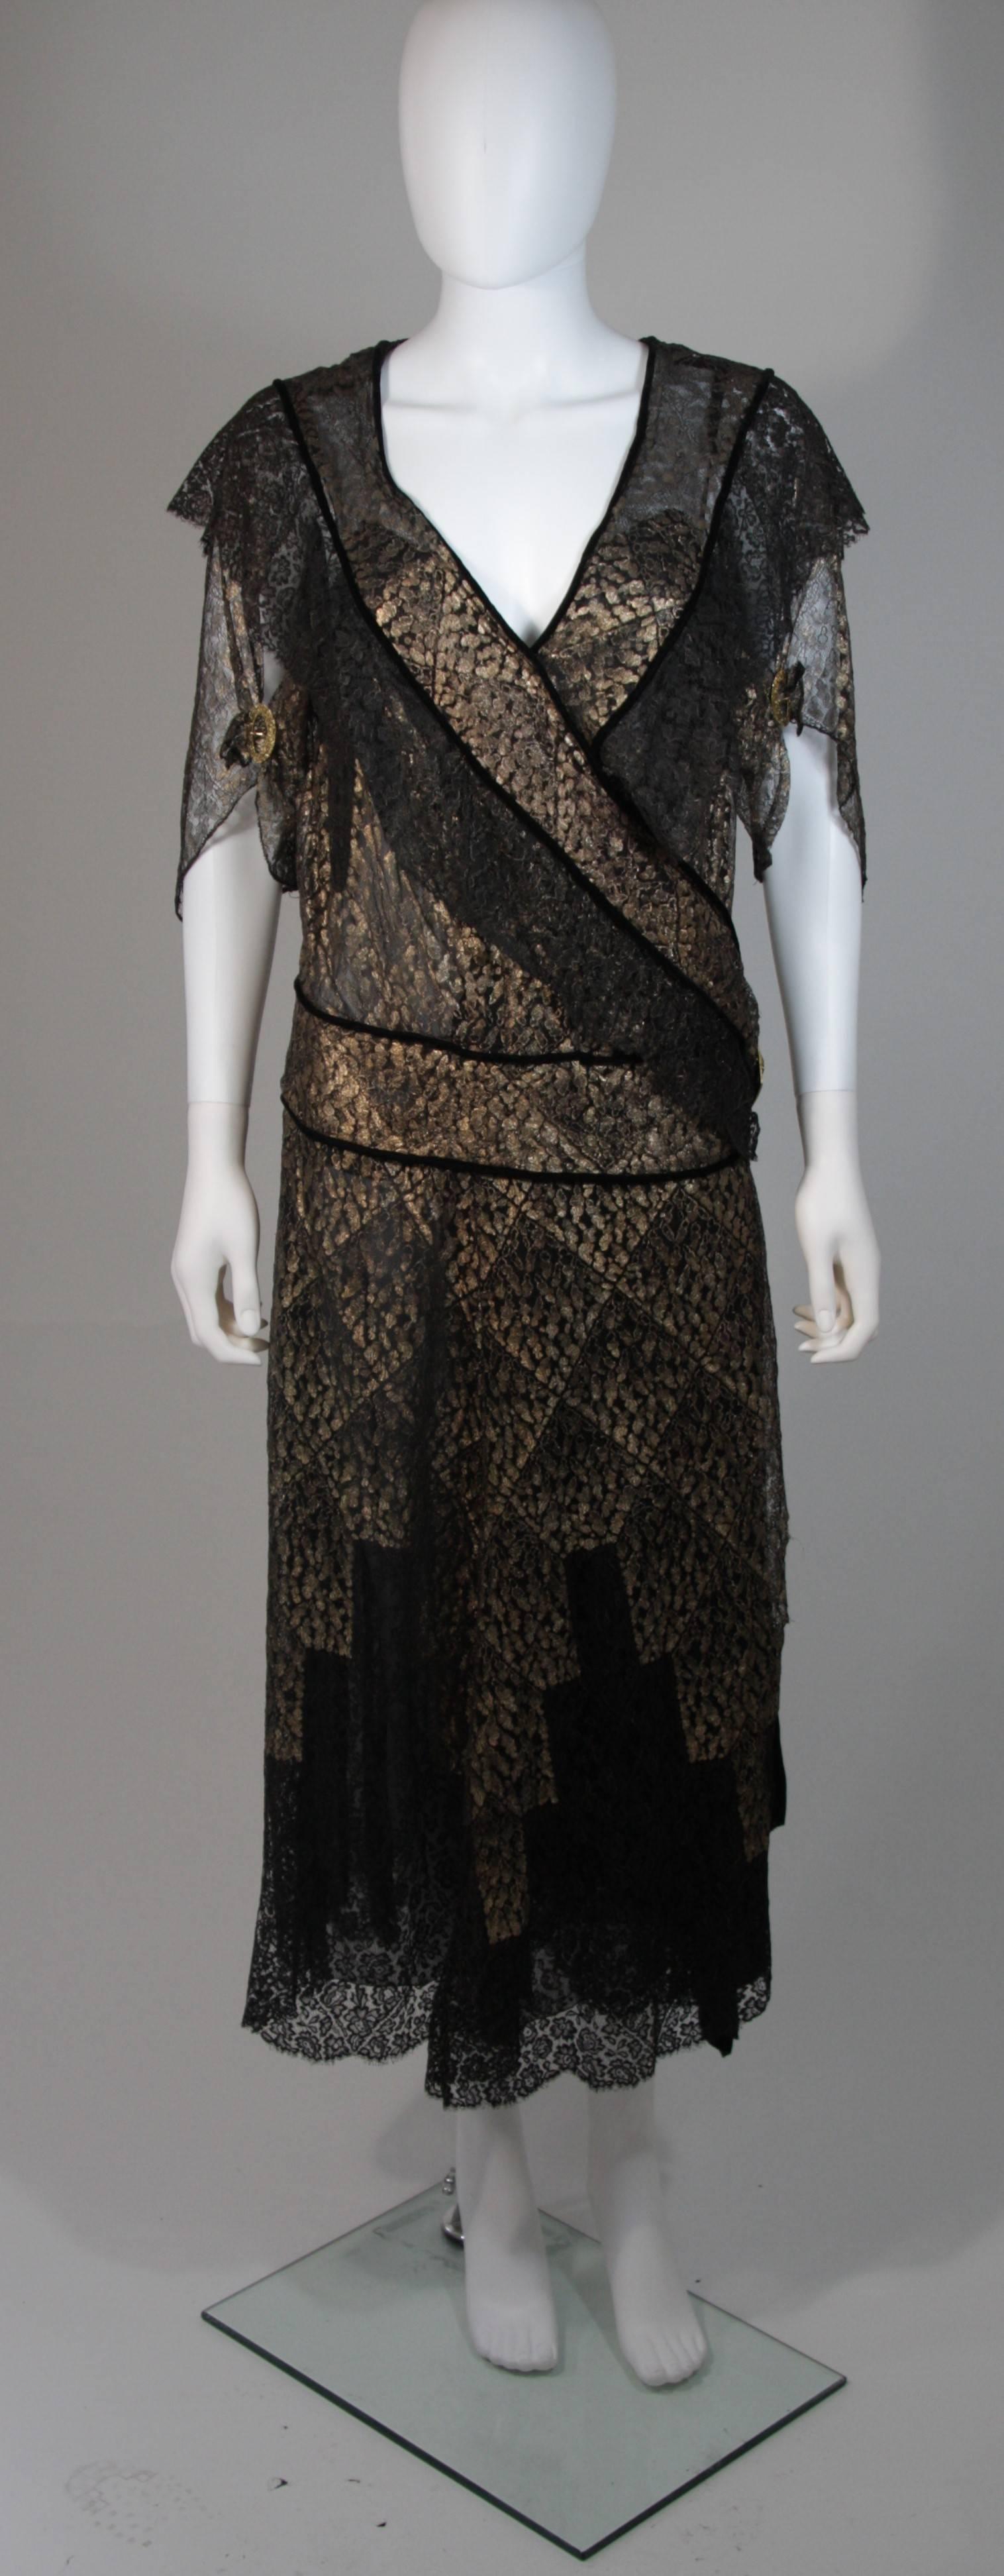 This vintage 1920s dress is composed of a black and gold lace which features a velvet trim. The wrap style dress features hook and eye closures, and snap closures. The waist and sleeves are adorned with different variations of gold/bronze hued